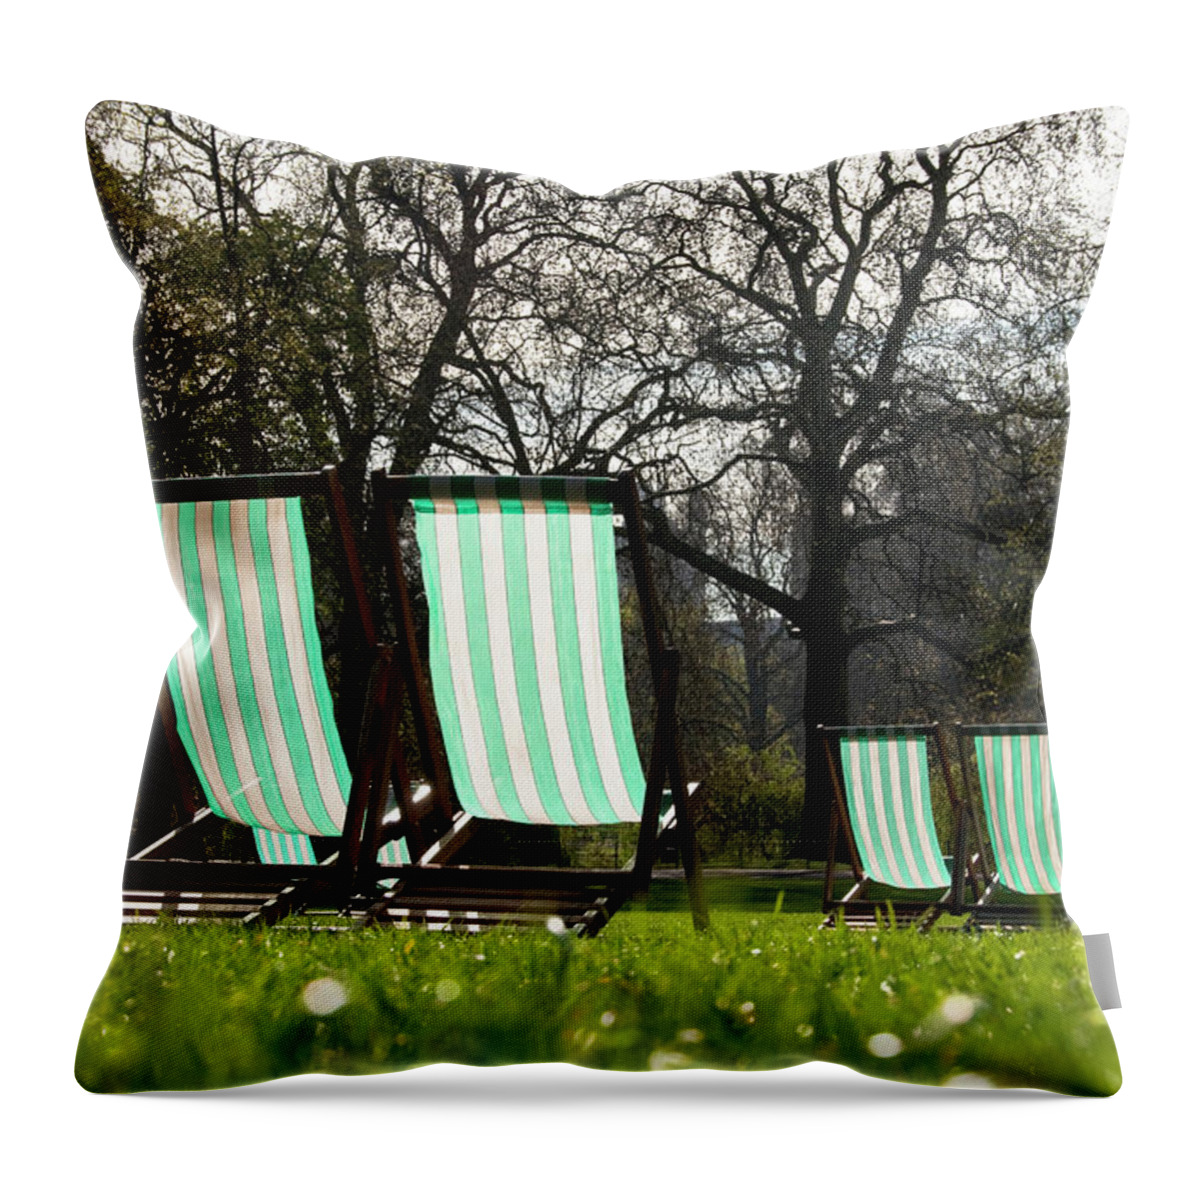 Garden Throw Pillow featuring the photograph Deck chairs in a park by Dutourdumonde Photography